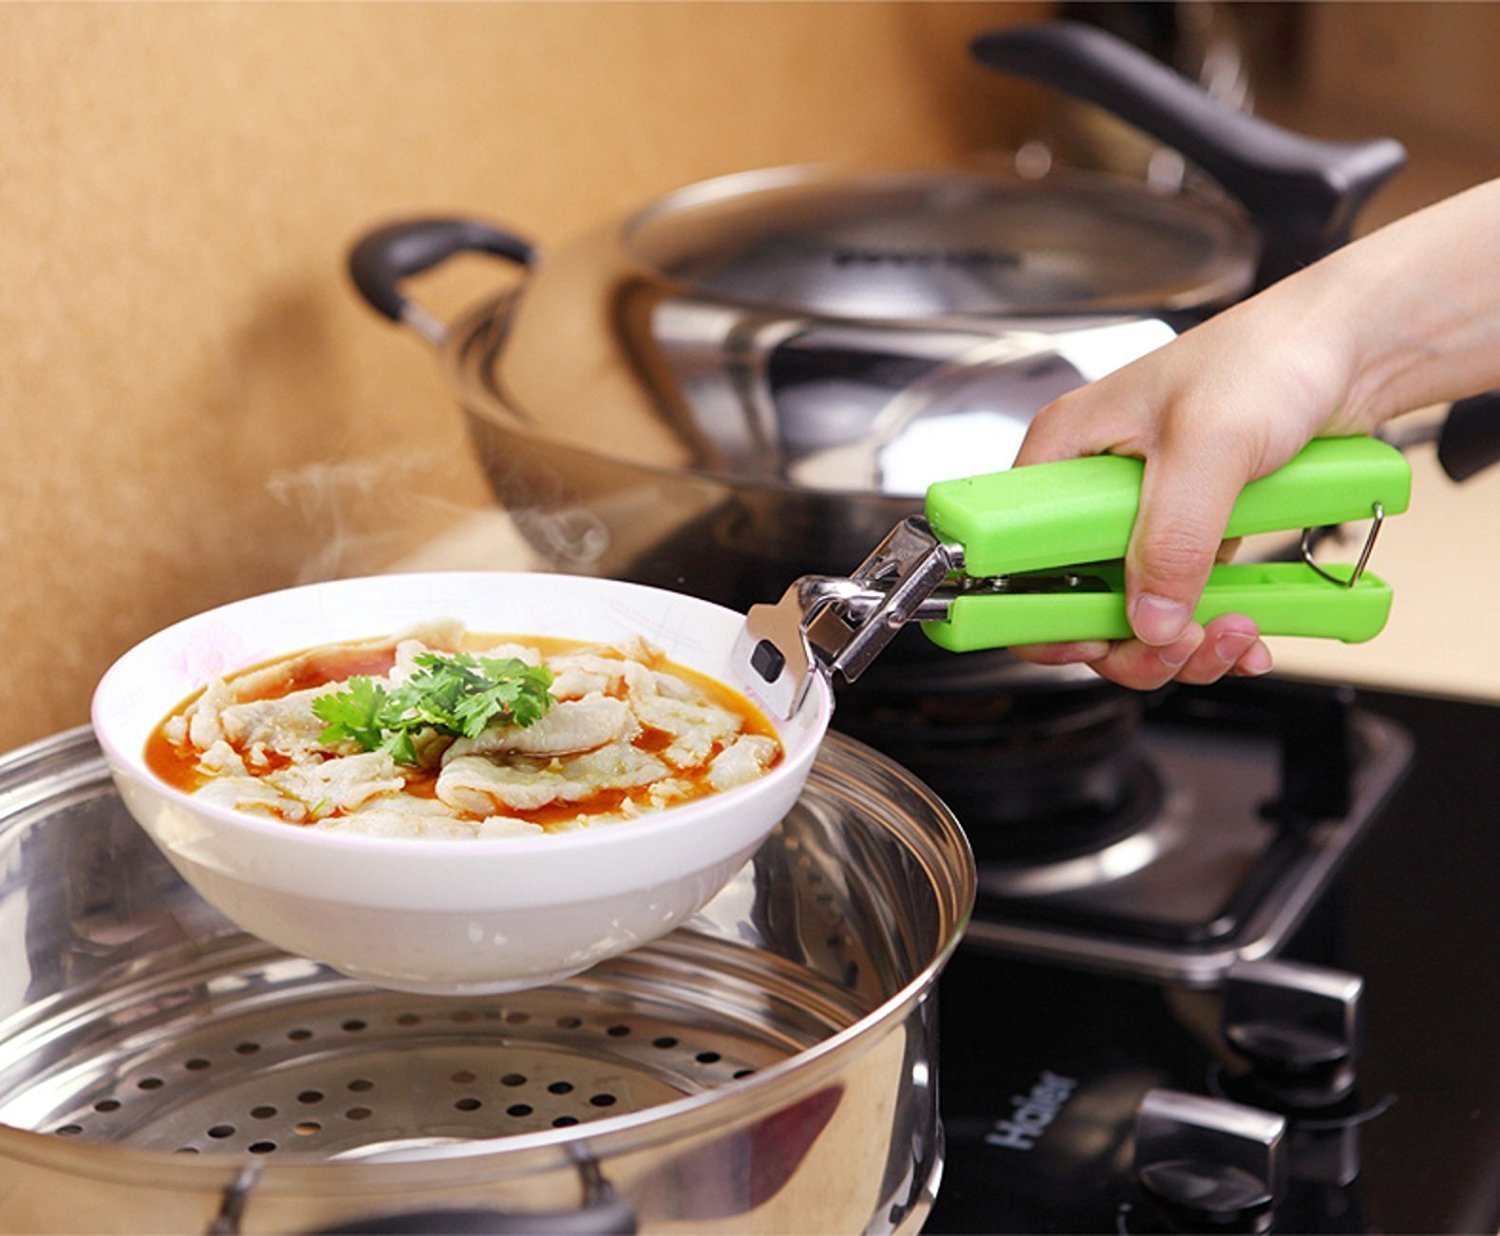 Hot Dish Plate Bowl Gripper Clip Kitchen Tool Tong Handle Kitchen Tool Accessories Instant Pot, Microwave, Oven,Air Fryer (Random Color)